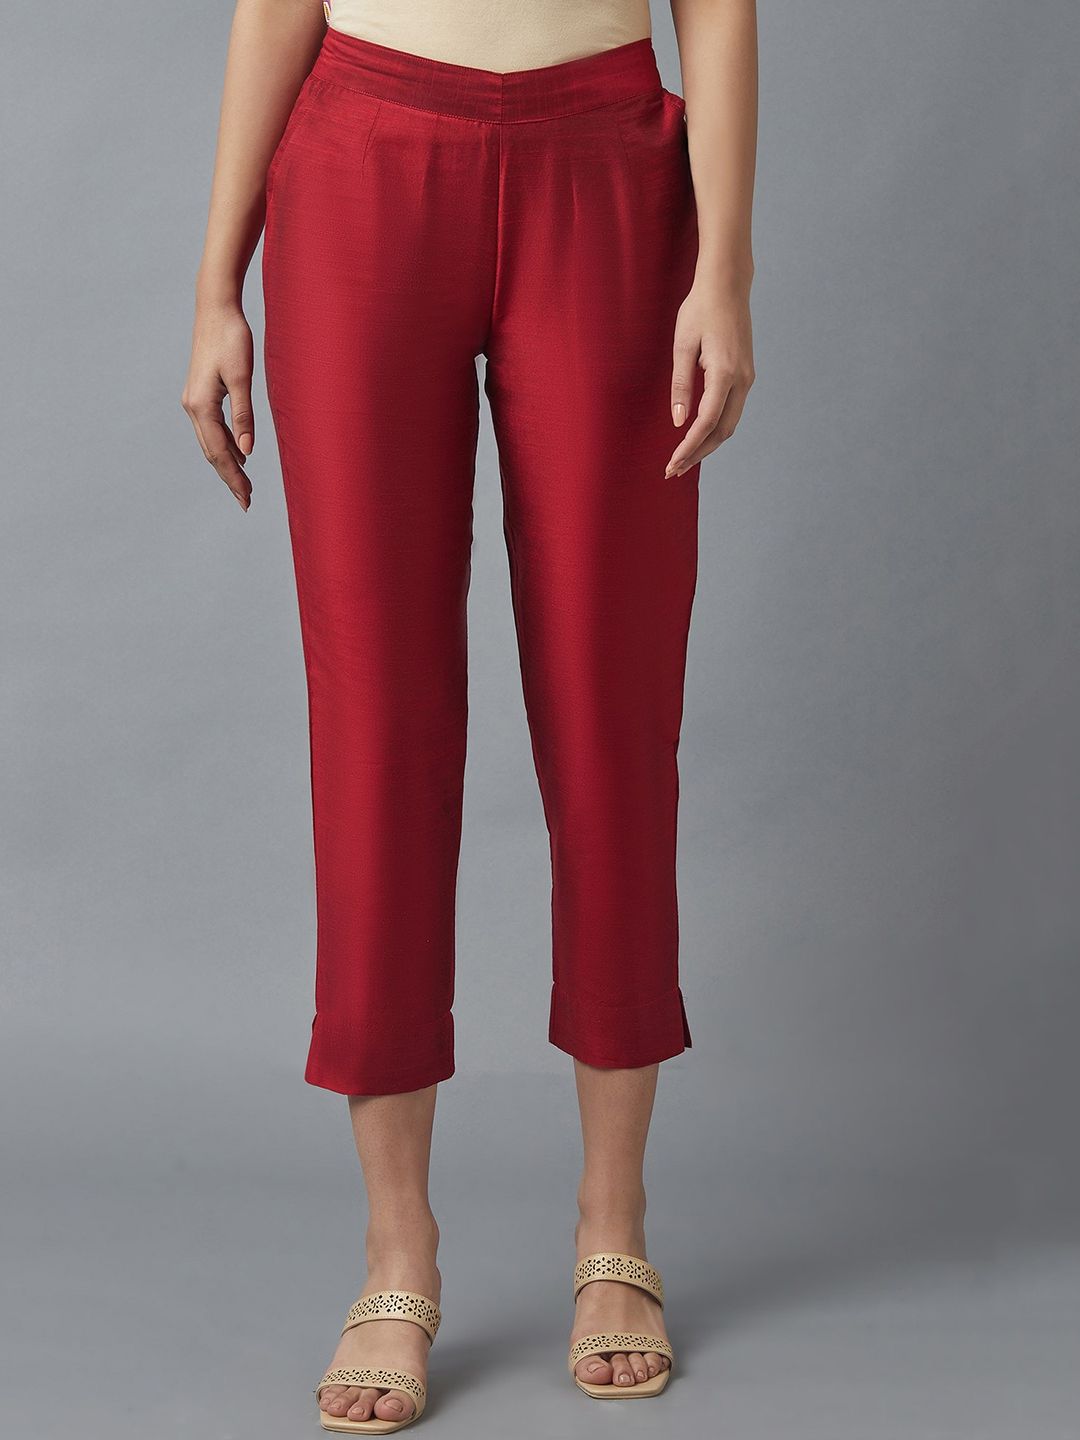 elleven Women Red Regular Fit Cropped Trousers Price in India